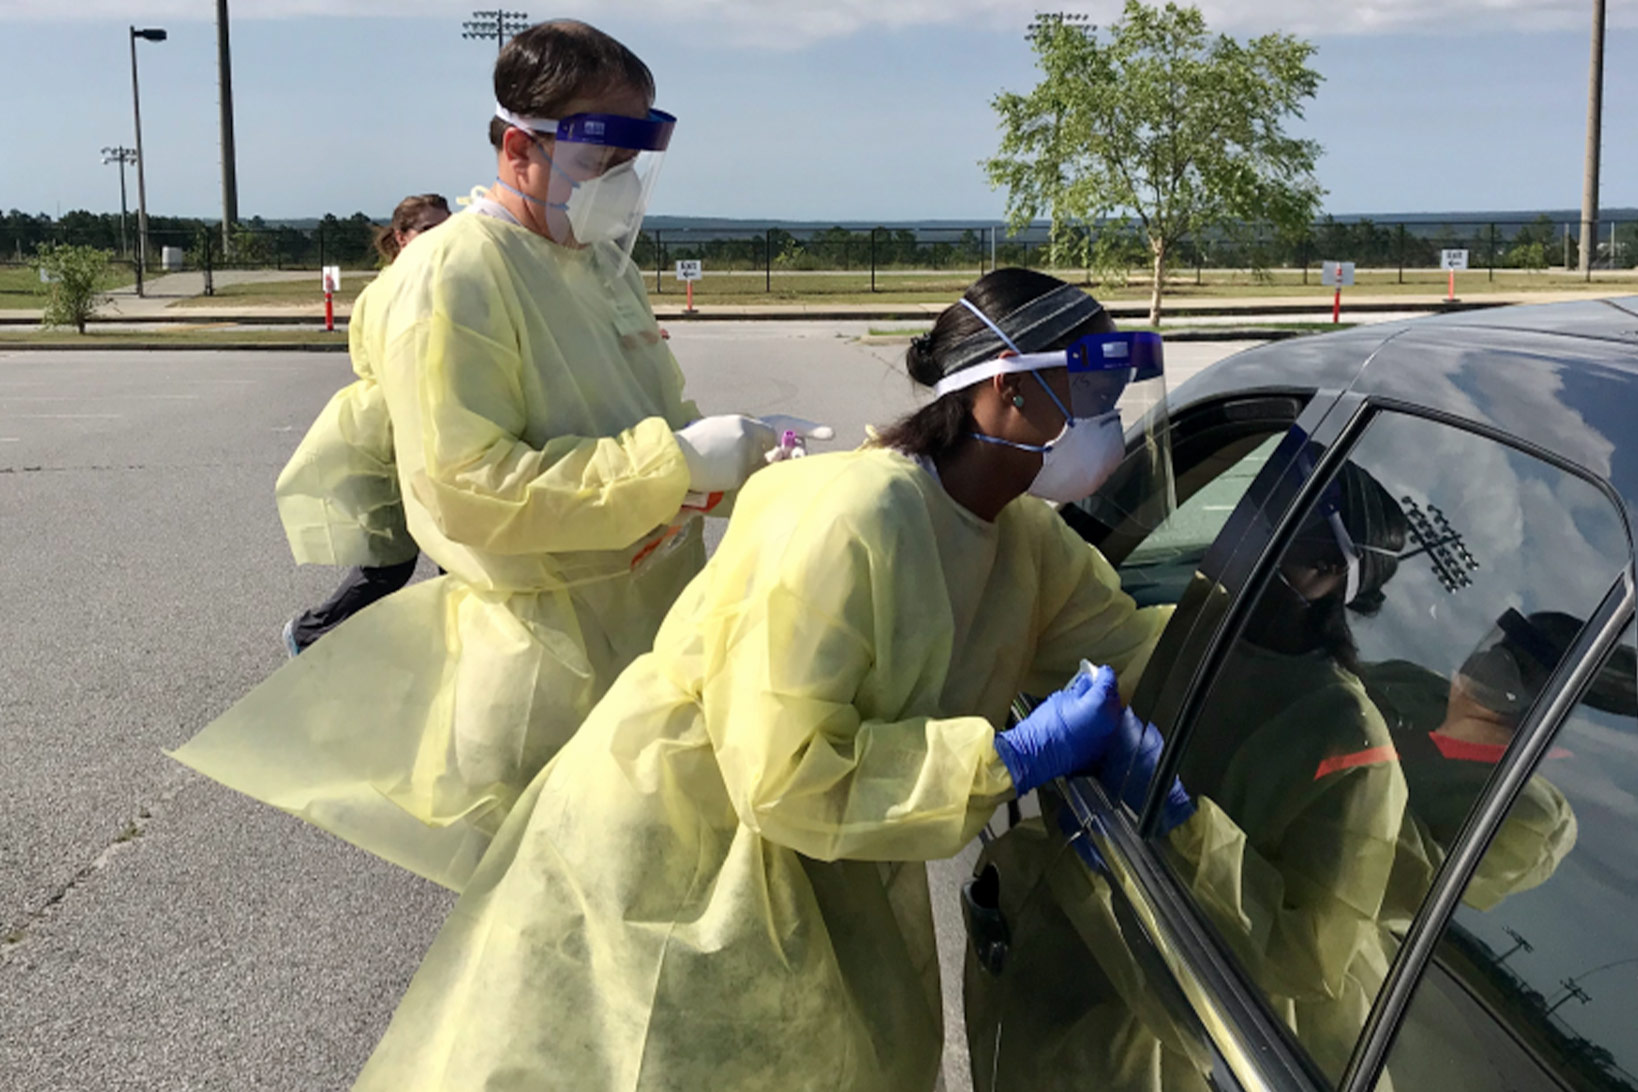 Clinicians in full protective gear and face shields in the Brookland Baptist Church parking lot give a COVID-19 test to a patient in a black sedan.